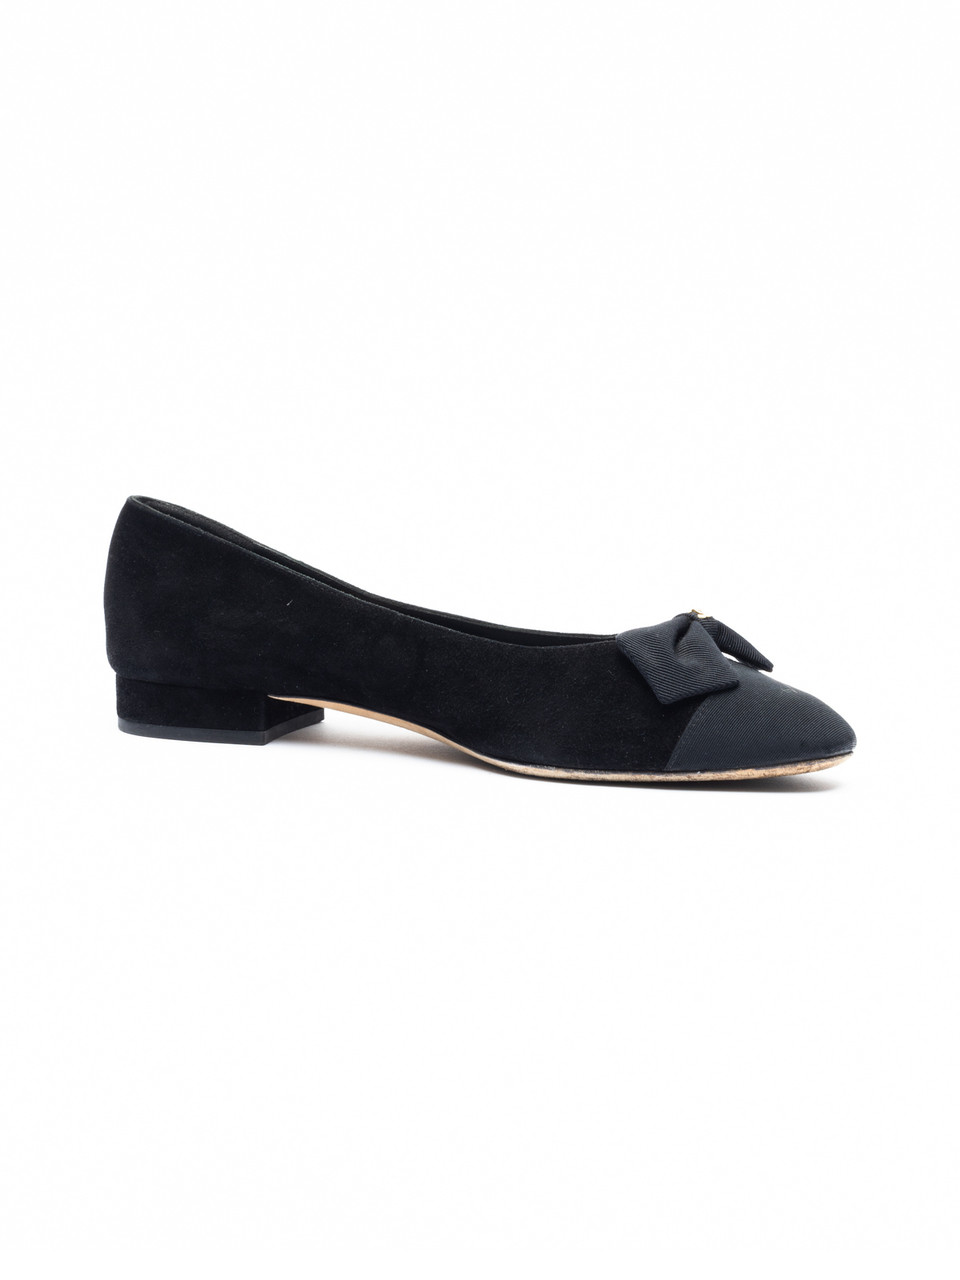 Chanel Black Suede Ballerinas with Grossgrain Bow